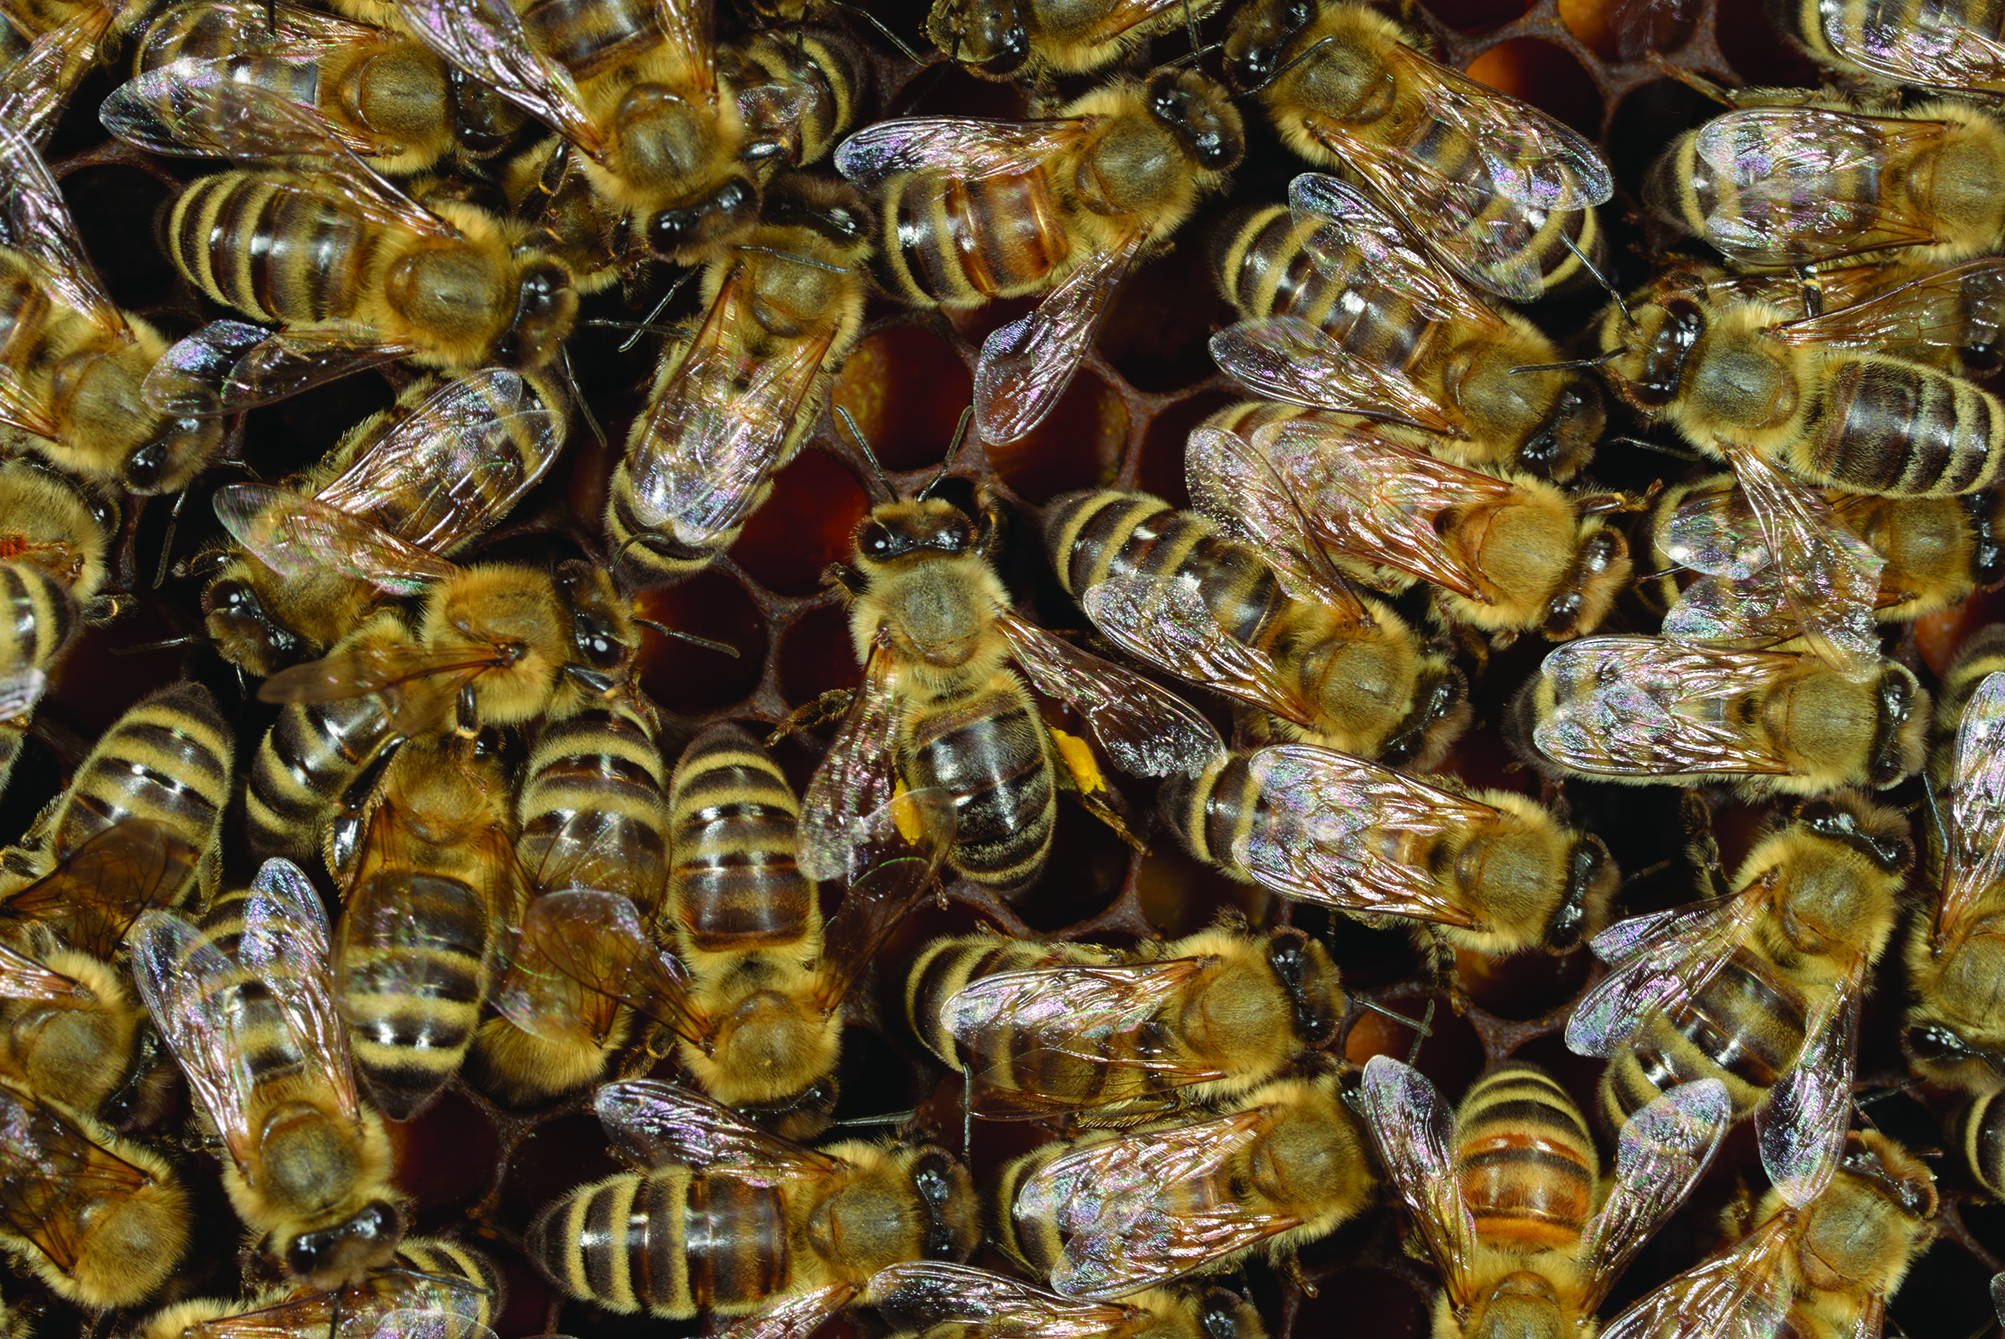 Figure 1. The close quarters of a honey bee hive make it easy to spread diseases, mites, pesticides, or other stressors.